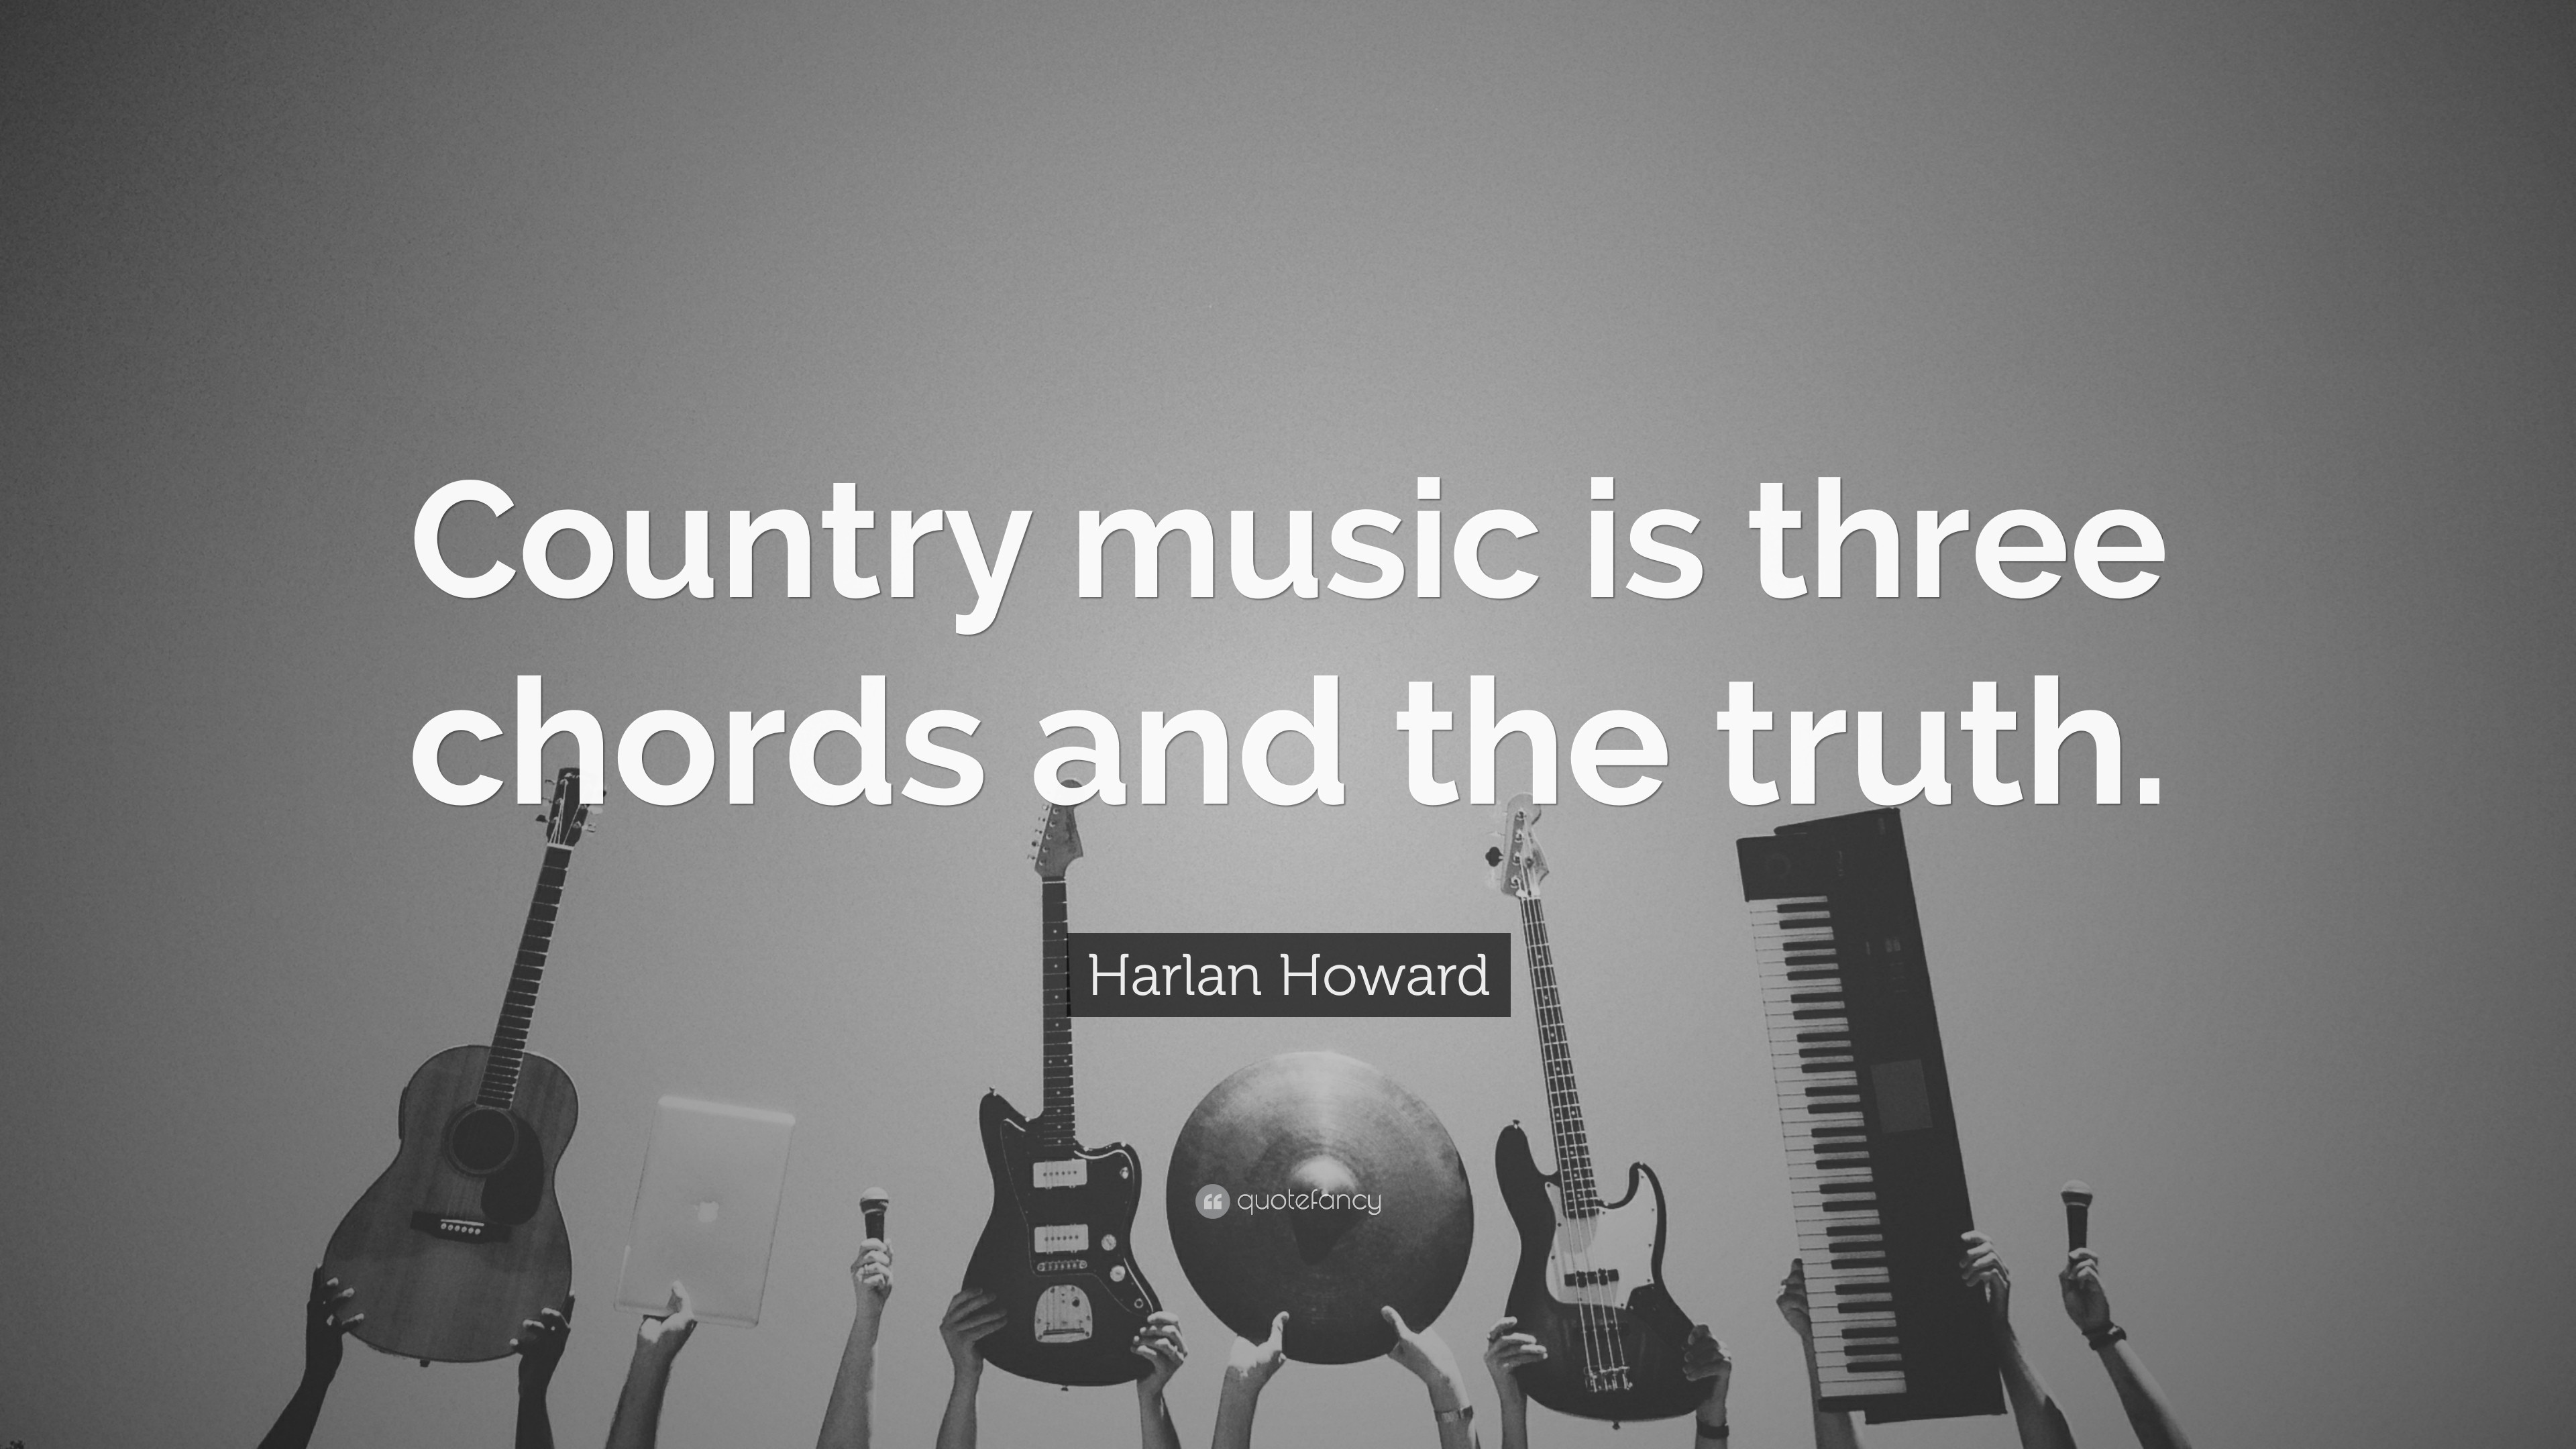 3840x2160 Harlan Howard Quote: “Country music is three chords and the truth.”